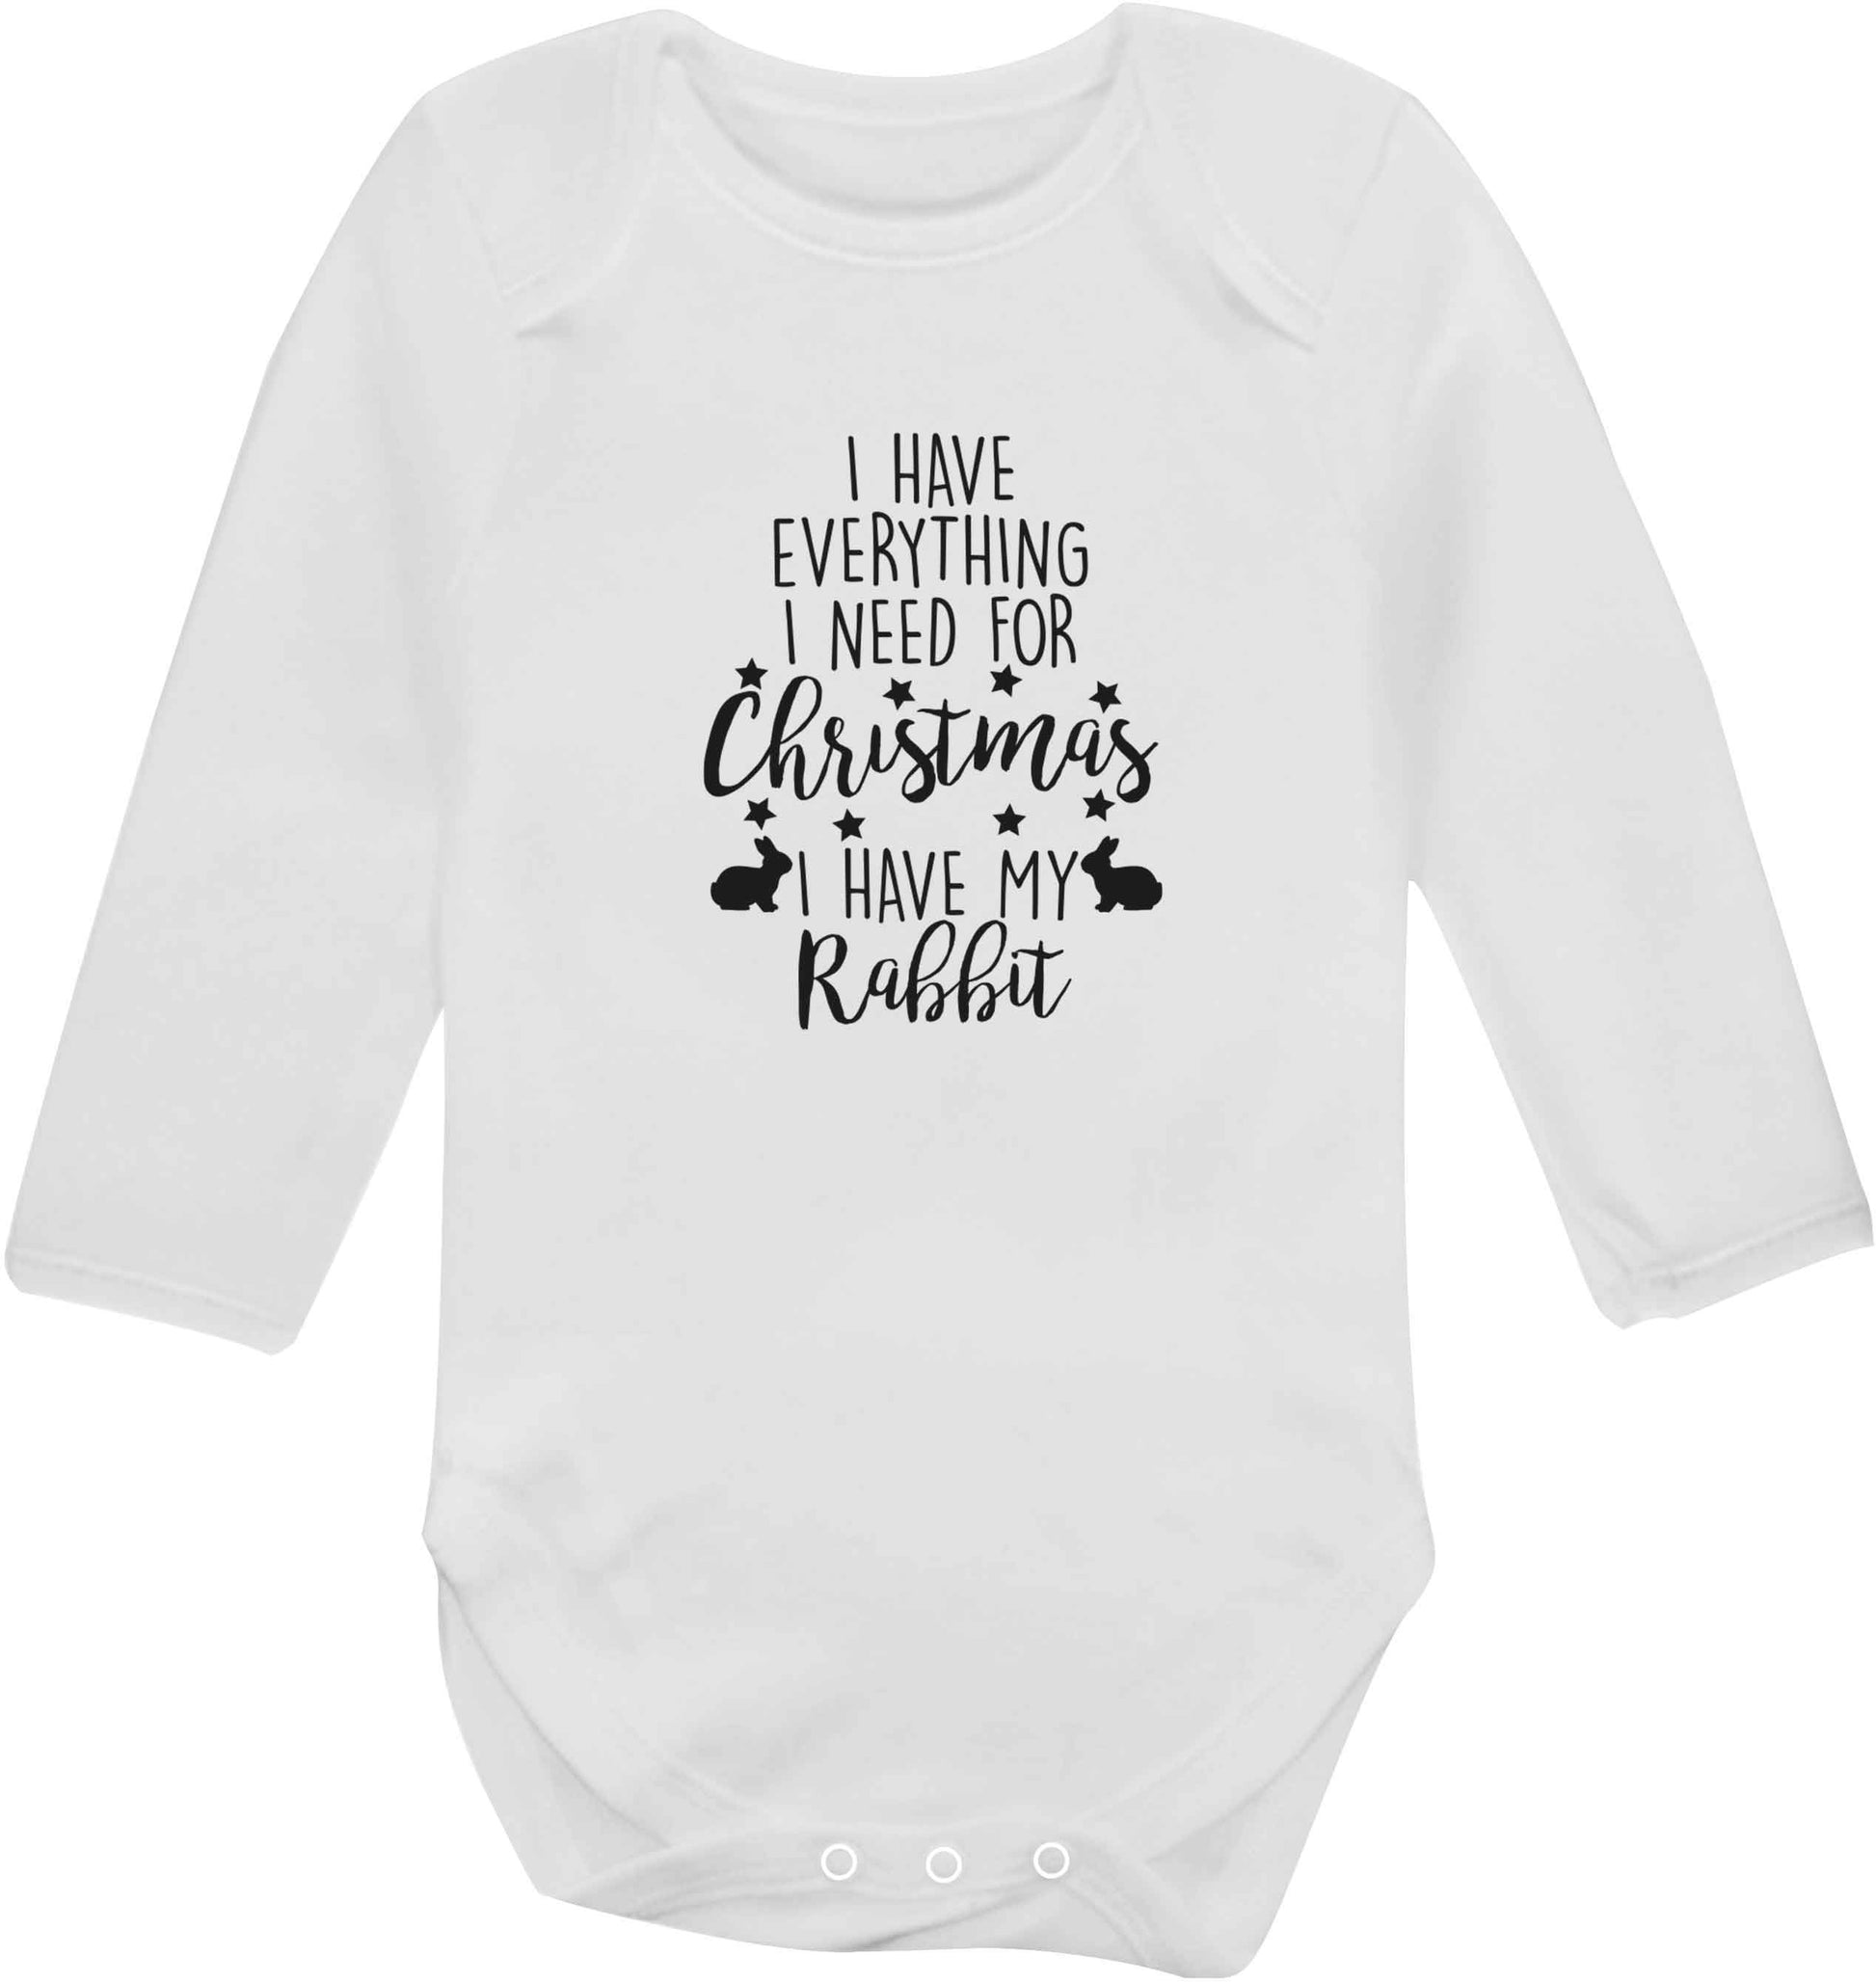 I have everything I need for Christmas I have my rabbit baby vest long sleeved white 6-12 months